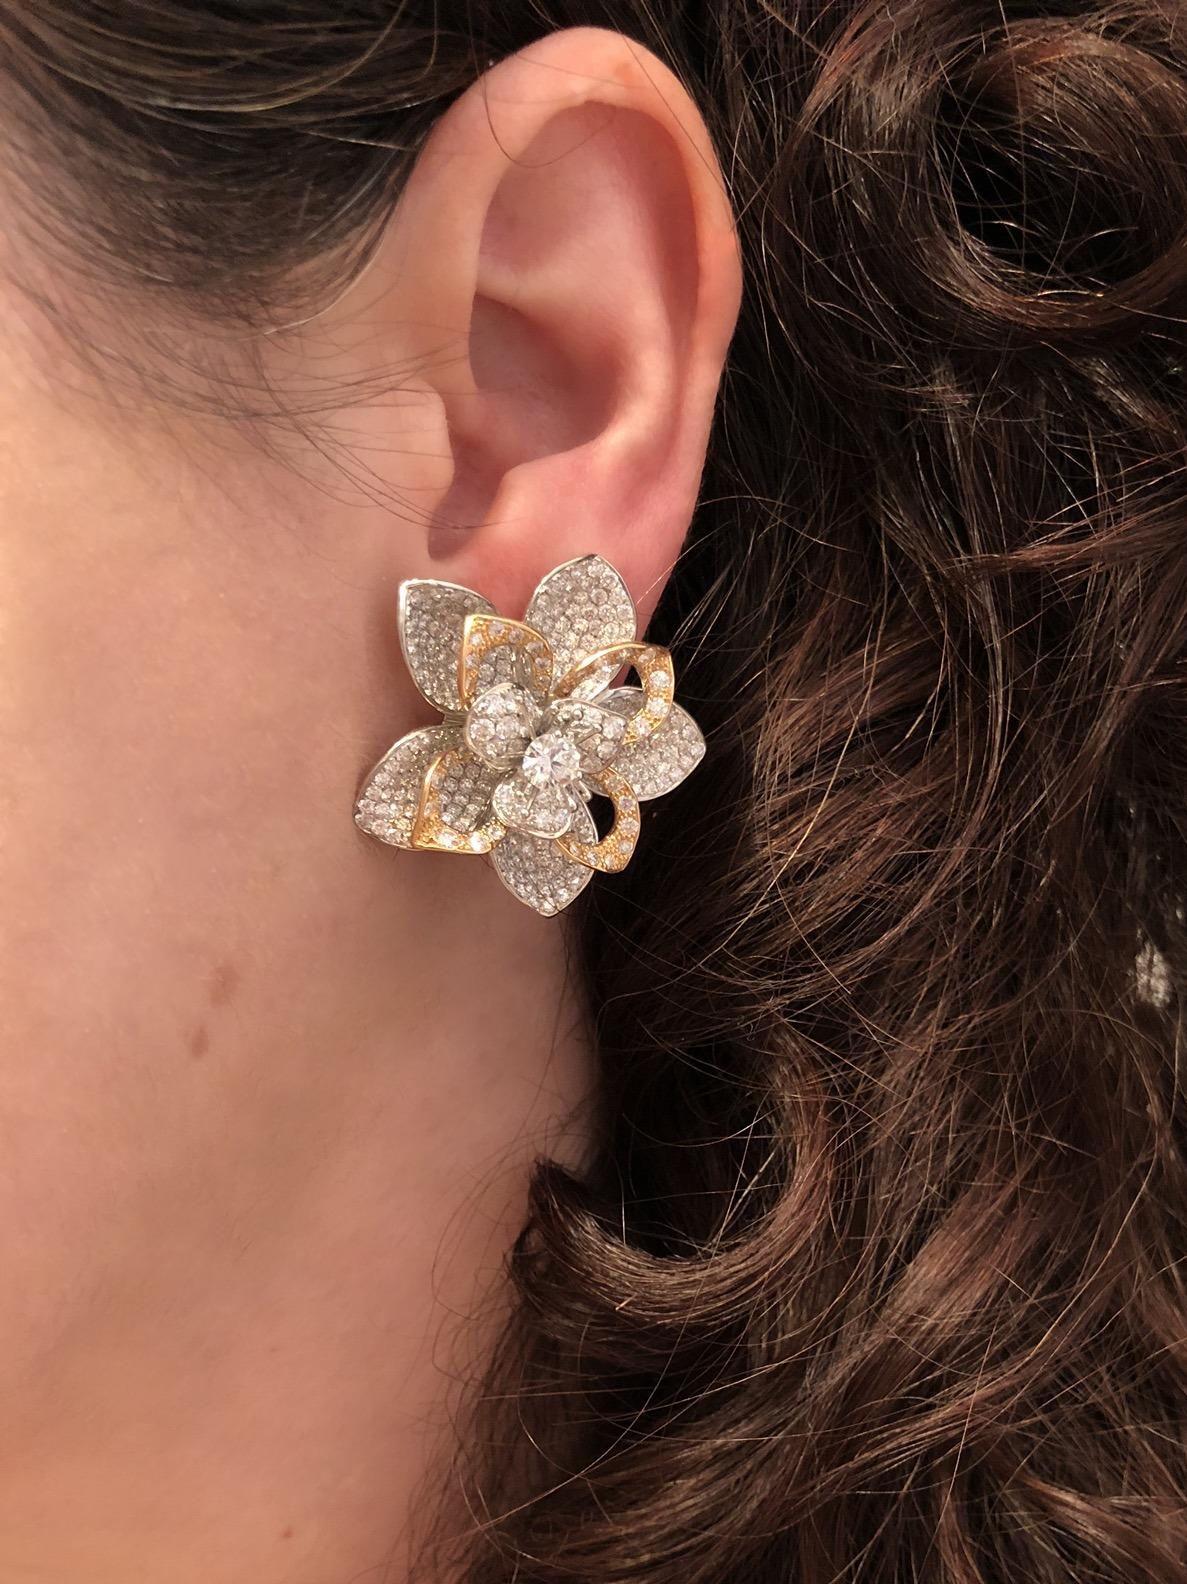 Round Cut Kwiat Diamond Flower Earrings from the Lotus Collection 18k White and Rose Gold